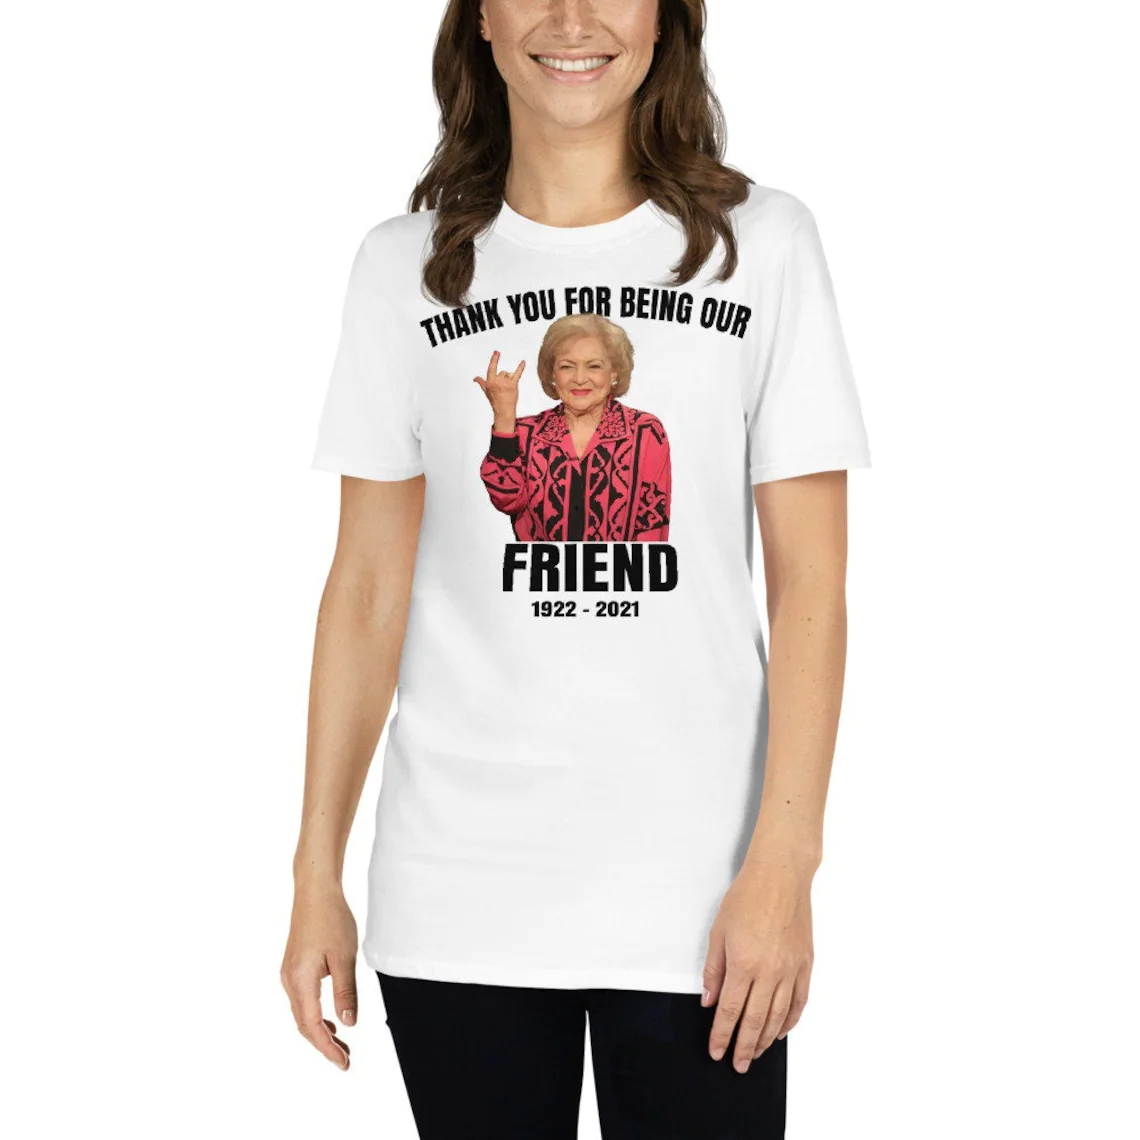  RIP Betty White T Shirt 1922-2021 - Thank You for Being Our Friend